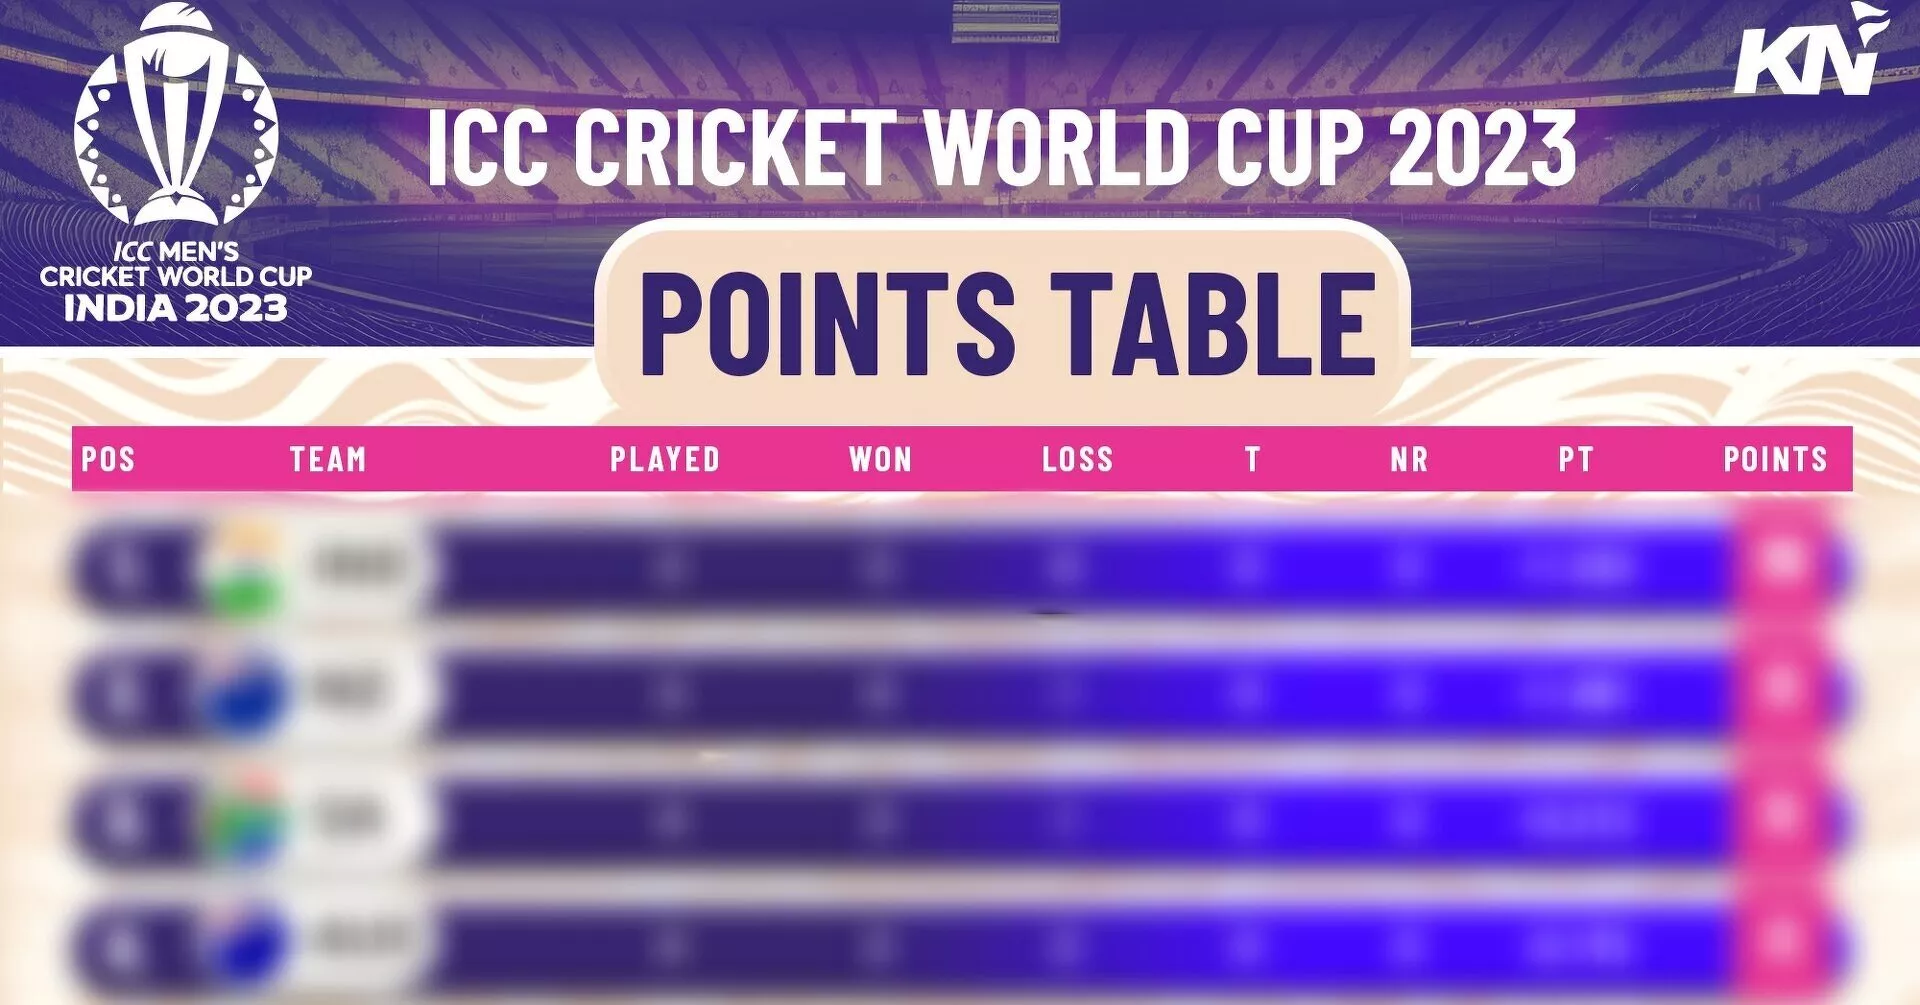 ICC Cricket World Cup 2023: Points Table, Most Runs, Most Wickets after match 22, PAK vs AFG